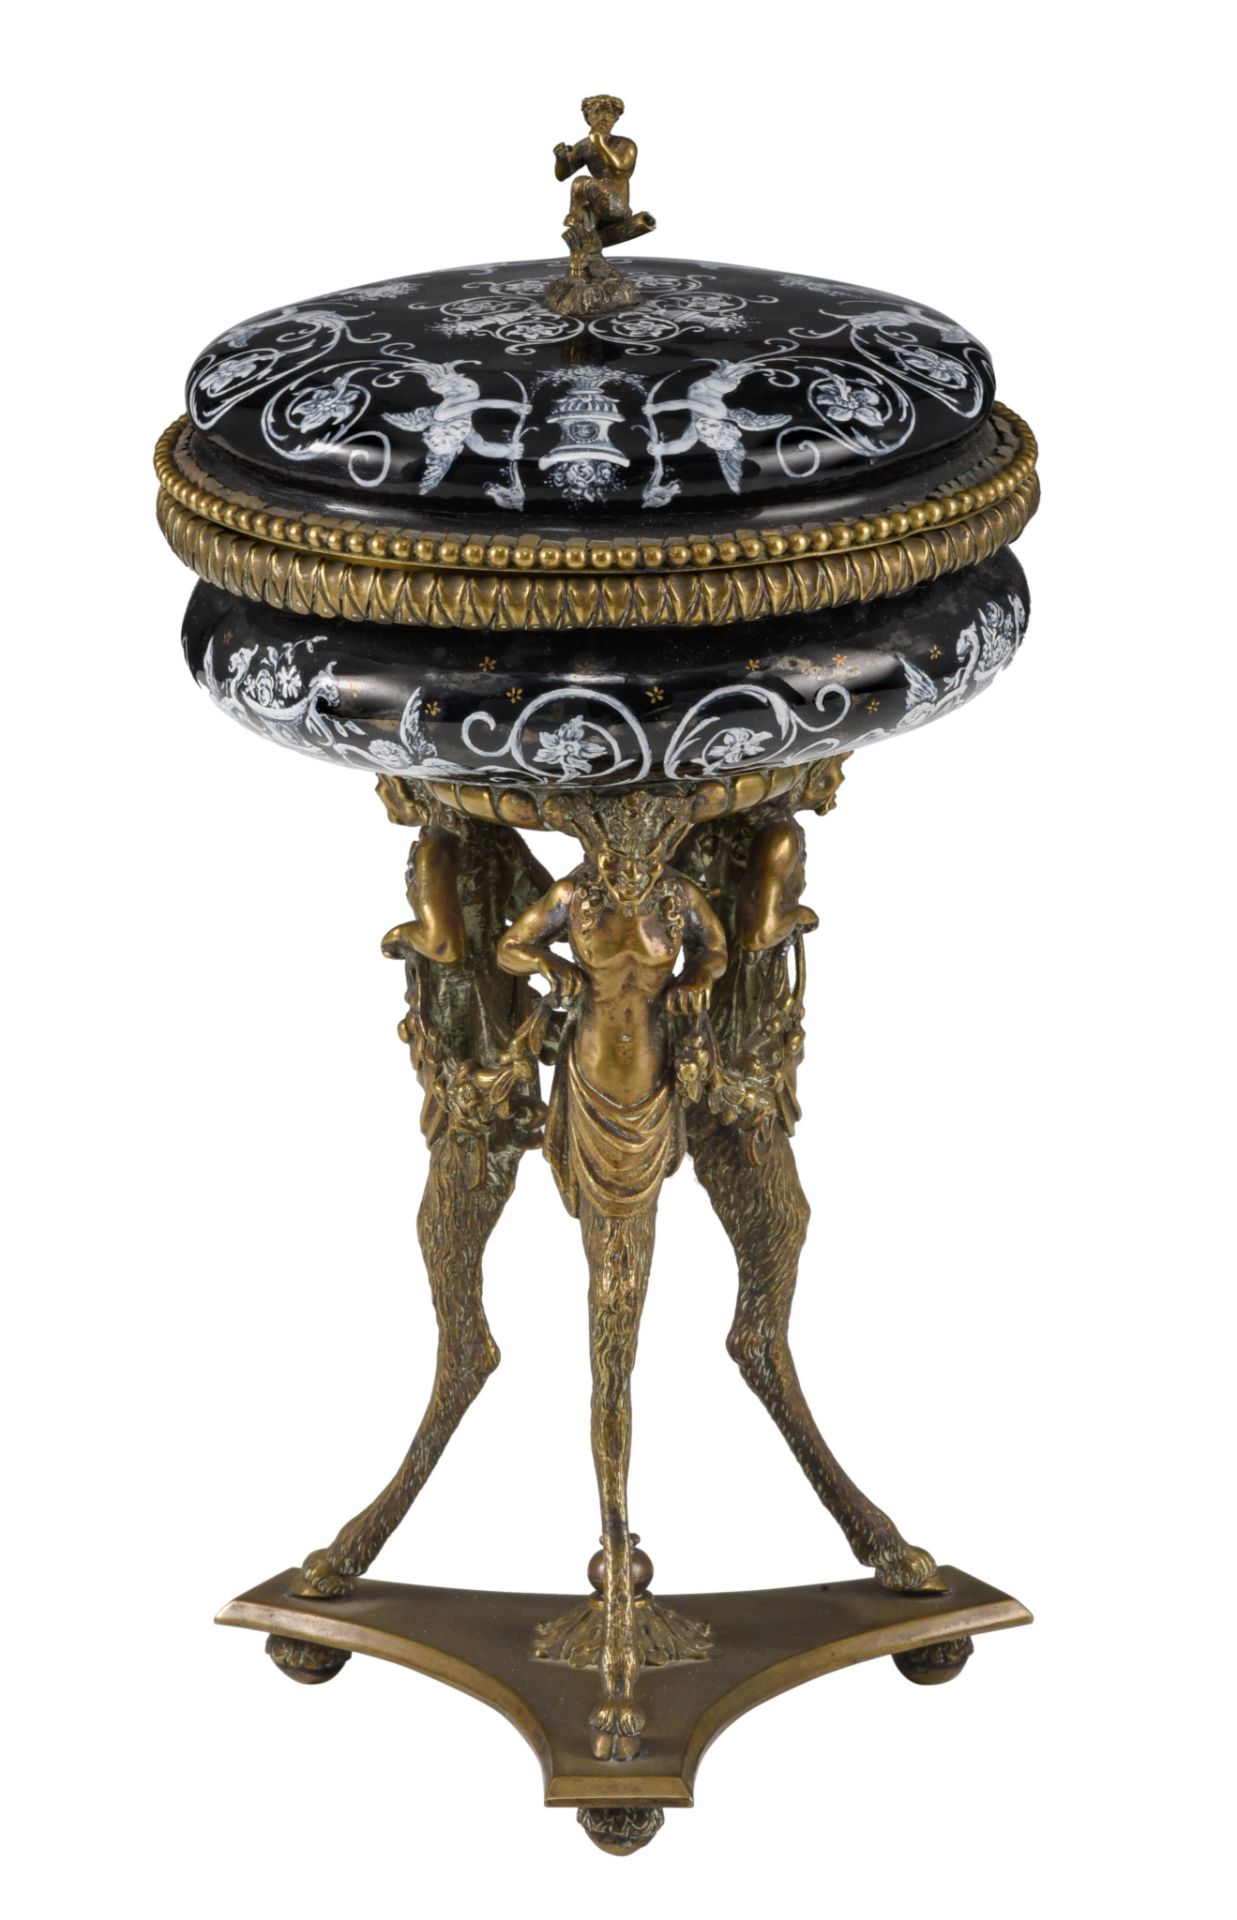 A Limoges enamel box with cover and a tazza with cover, Napoleon III period, H 8 - 23 cm - Image 8 of 16